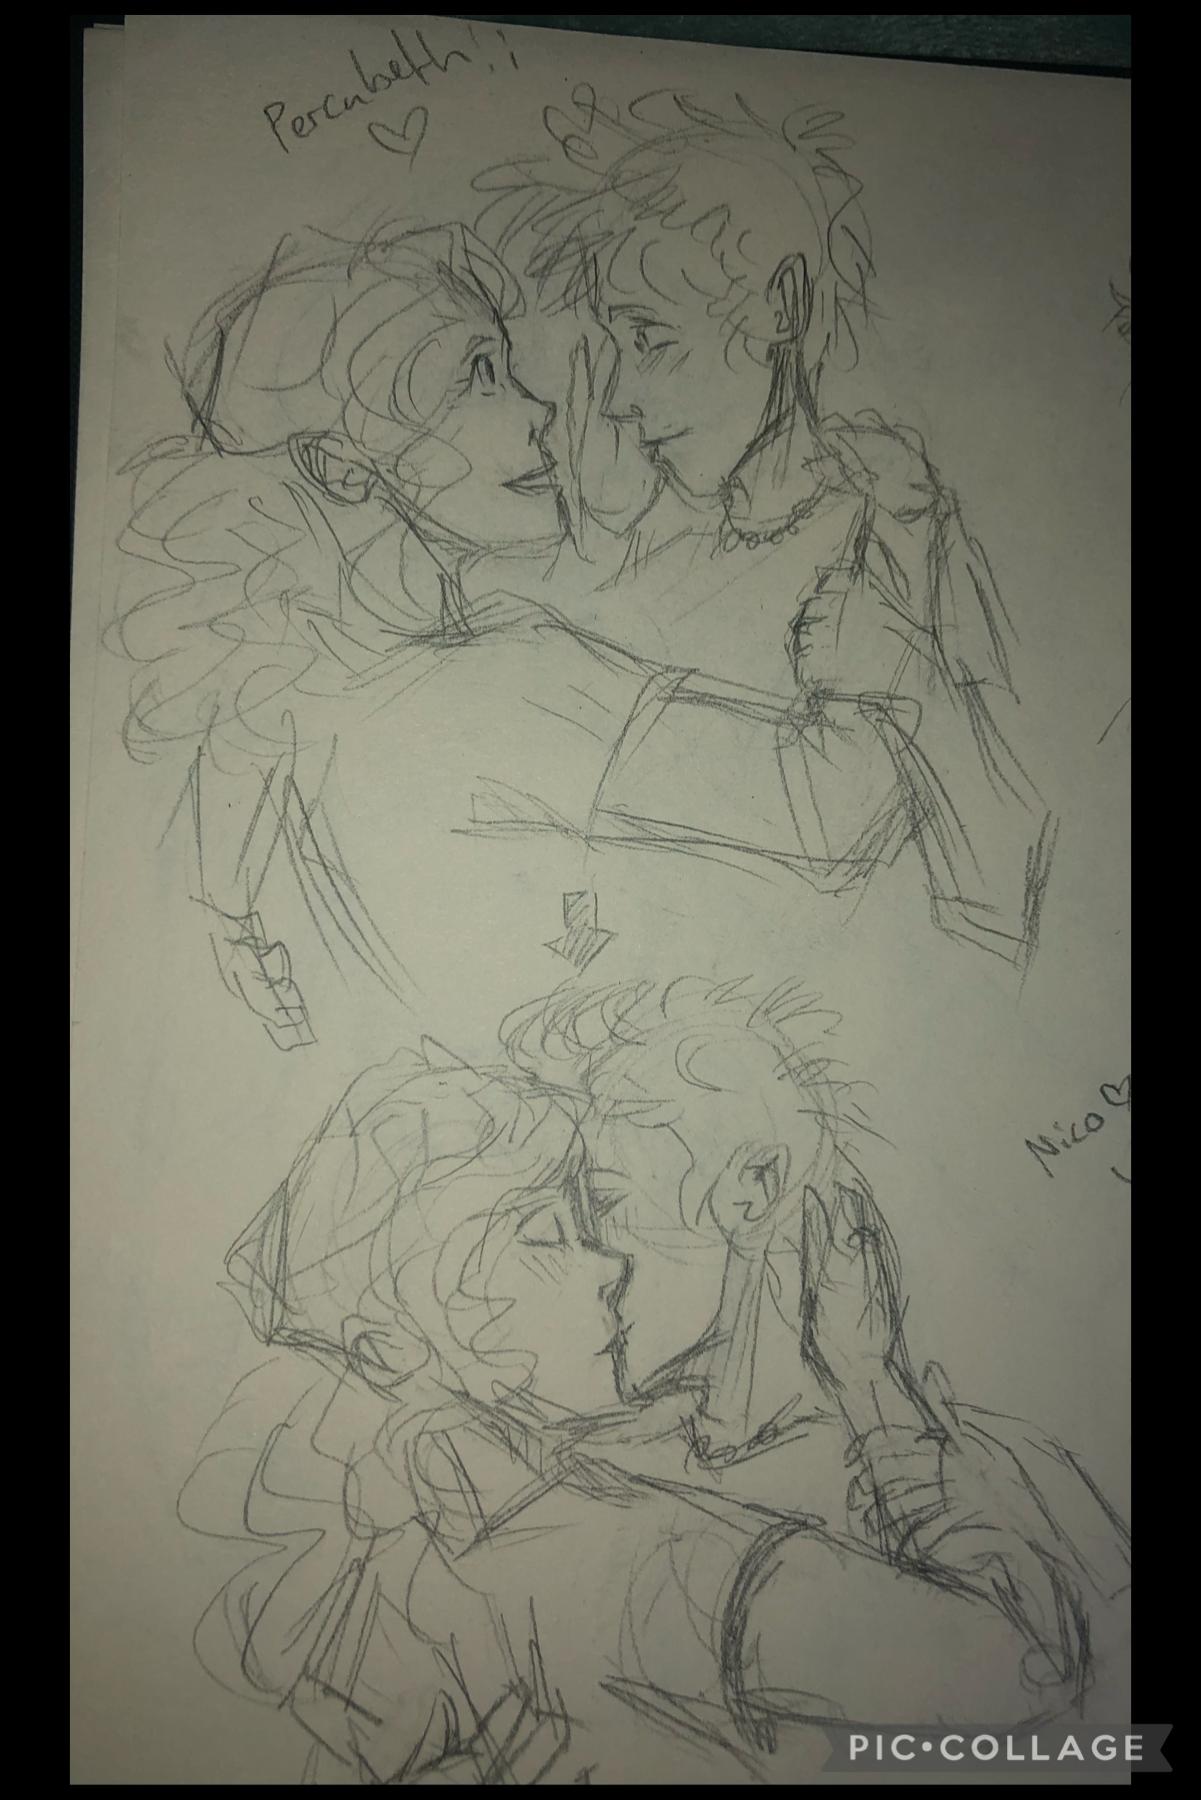 Been a bit since I’ve posted, thought I’d show I’m still alive with a percabeth sketch 